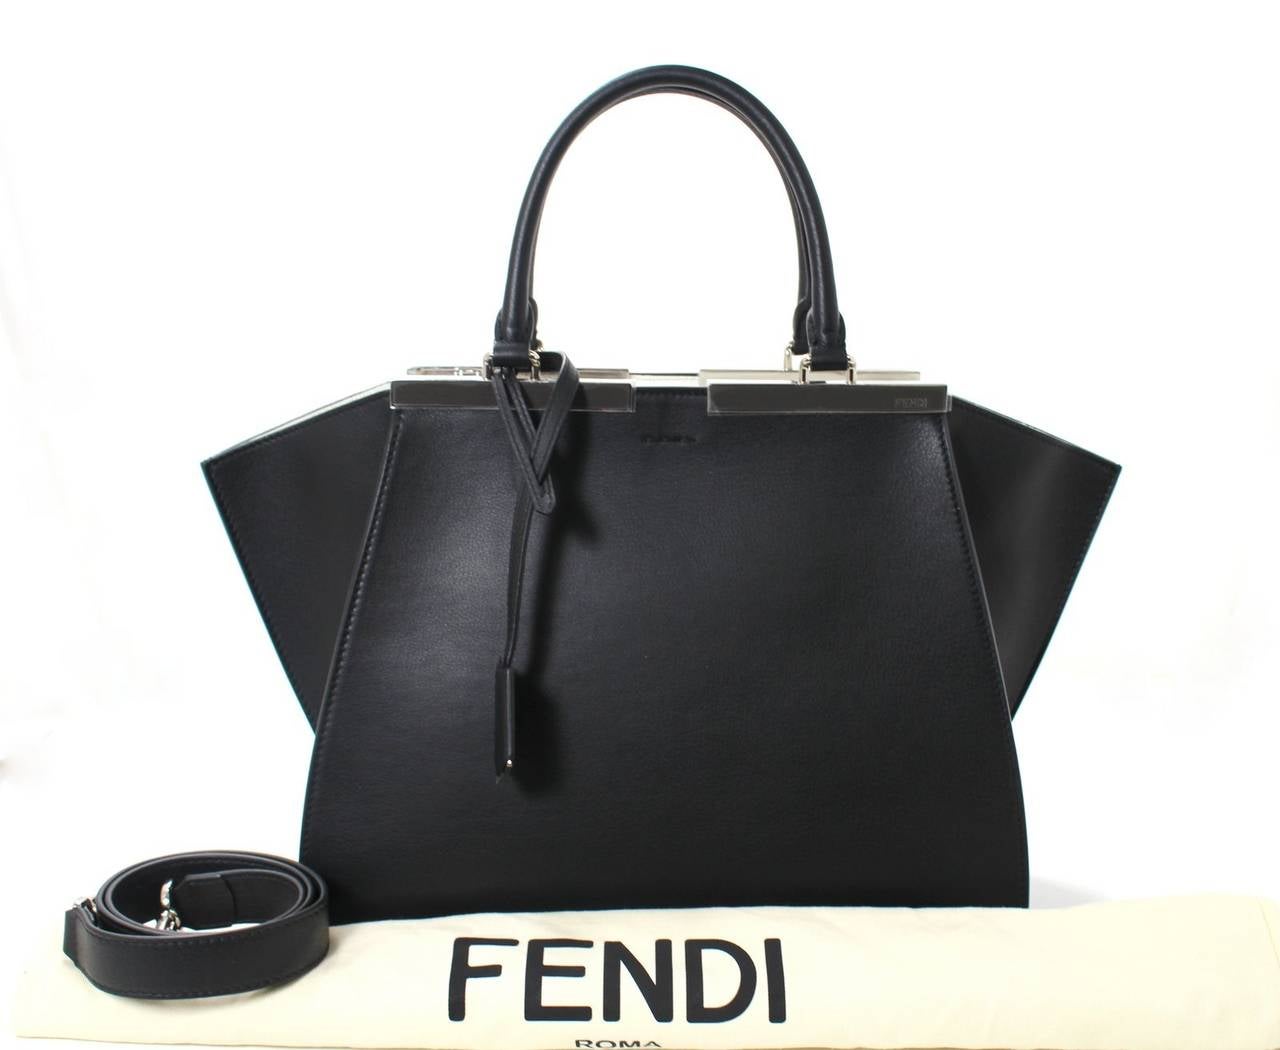 Fendi 3Jours Tote in Black Leather with White Interior 6